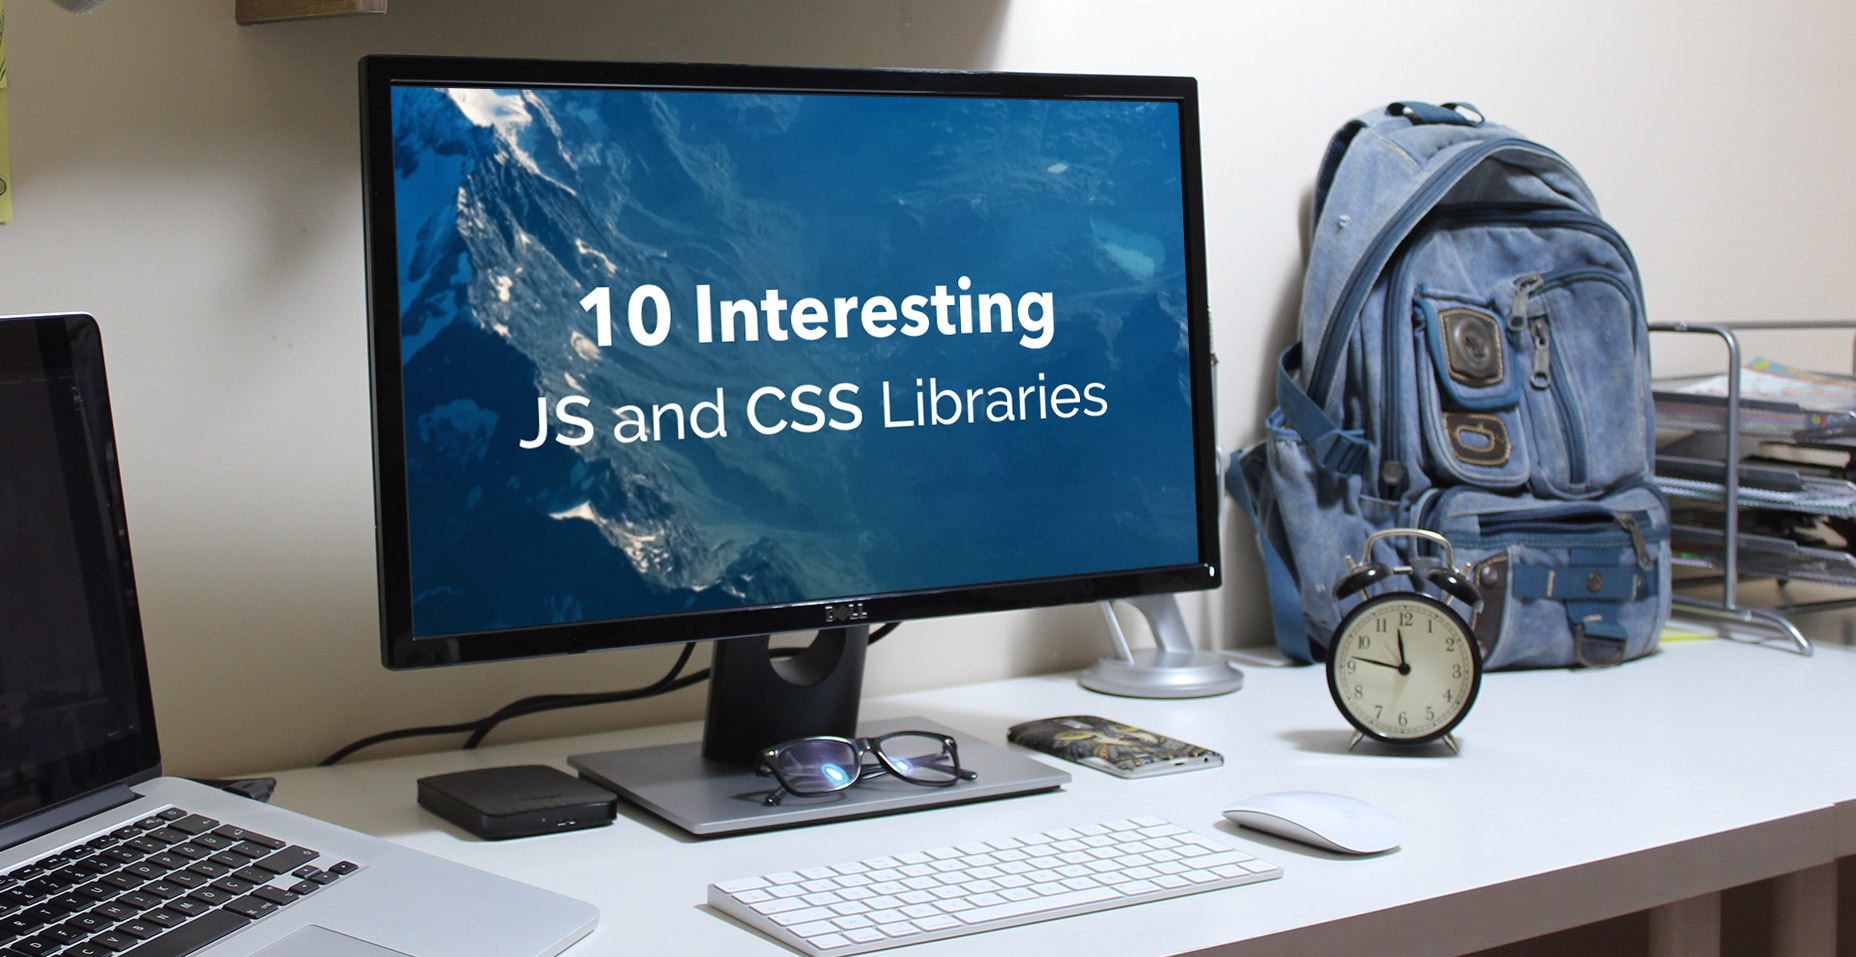 10 Interesting JavaScript and CSS Libraries for September 2019